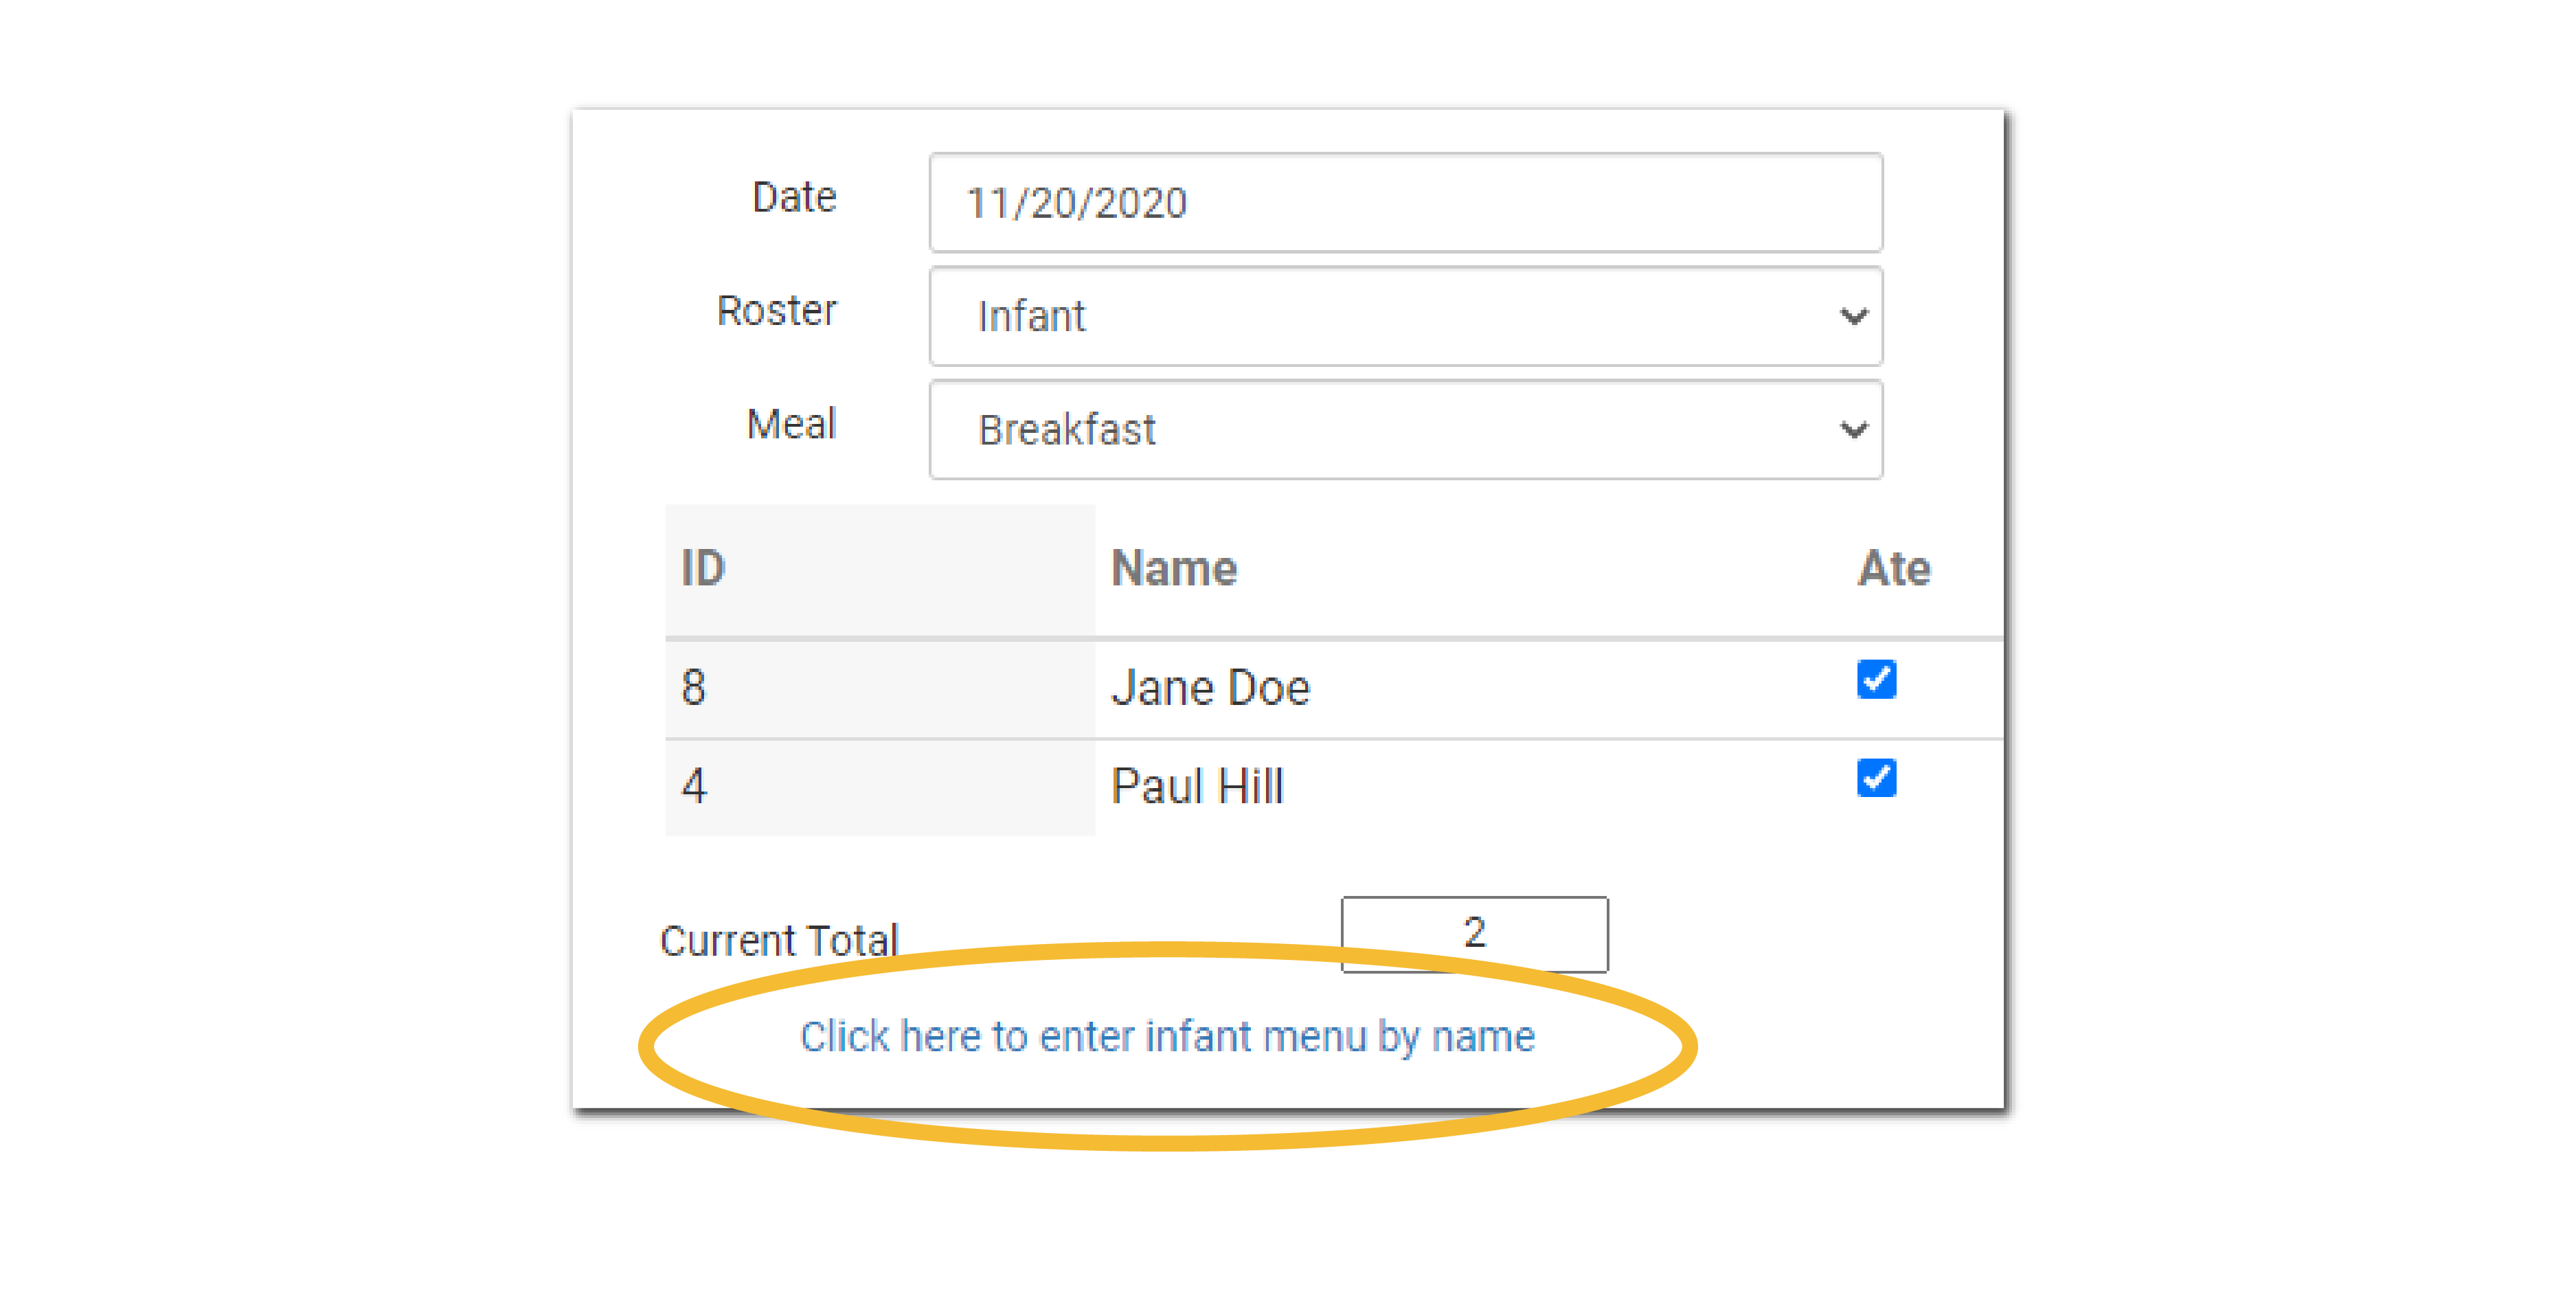 Hyperlink to Infant Menu by Name